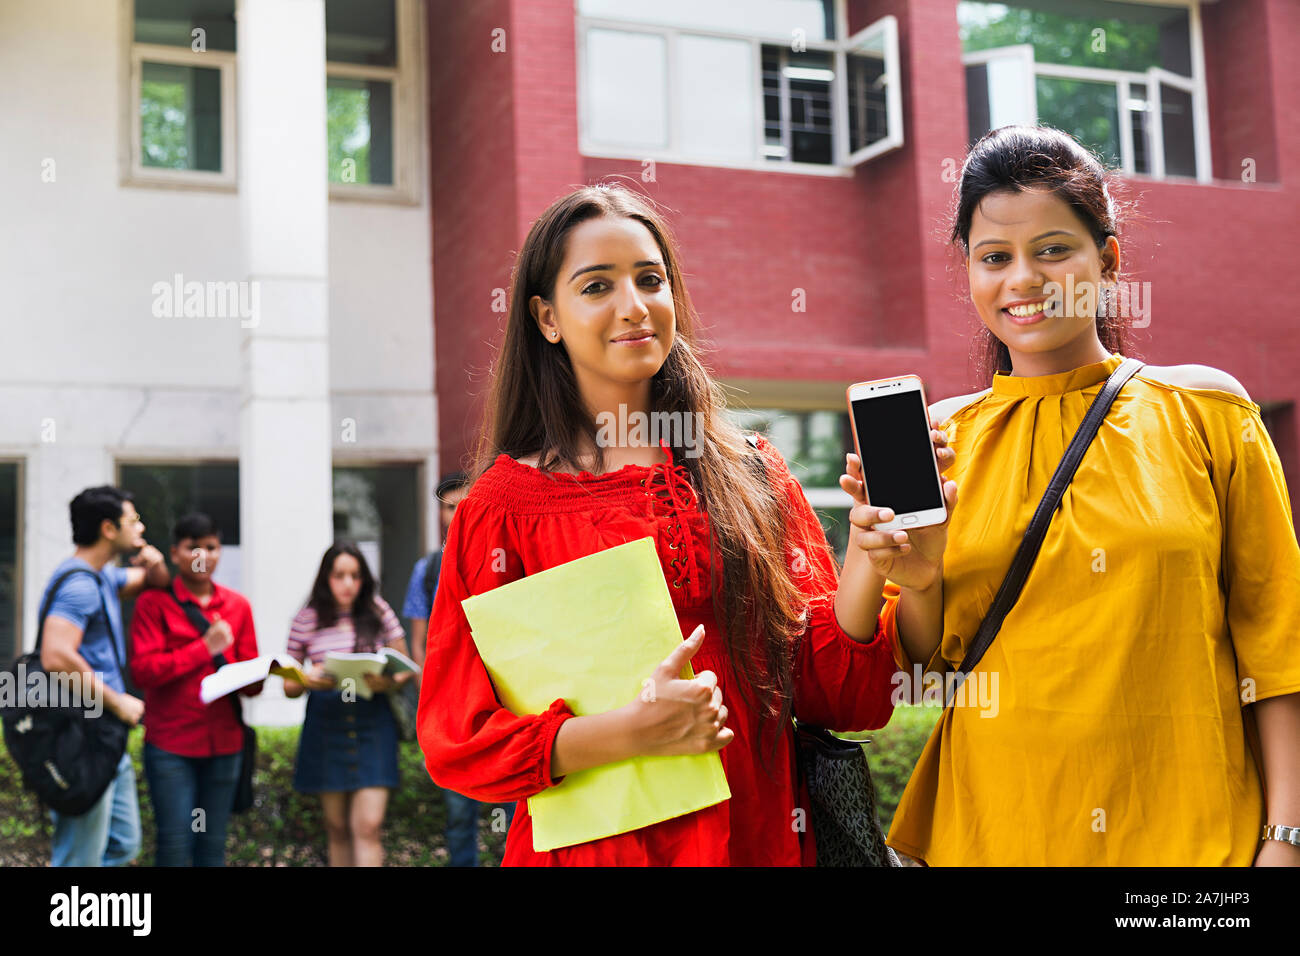 Two Young College Girls Student Friends toegther Showing mobile-Phone In-Outside University Campus Stock Photo